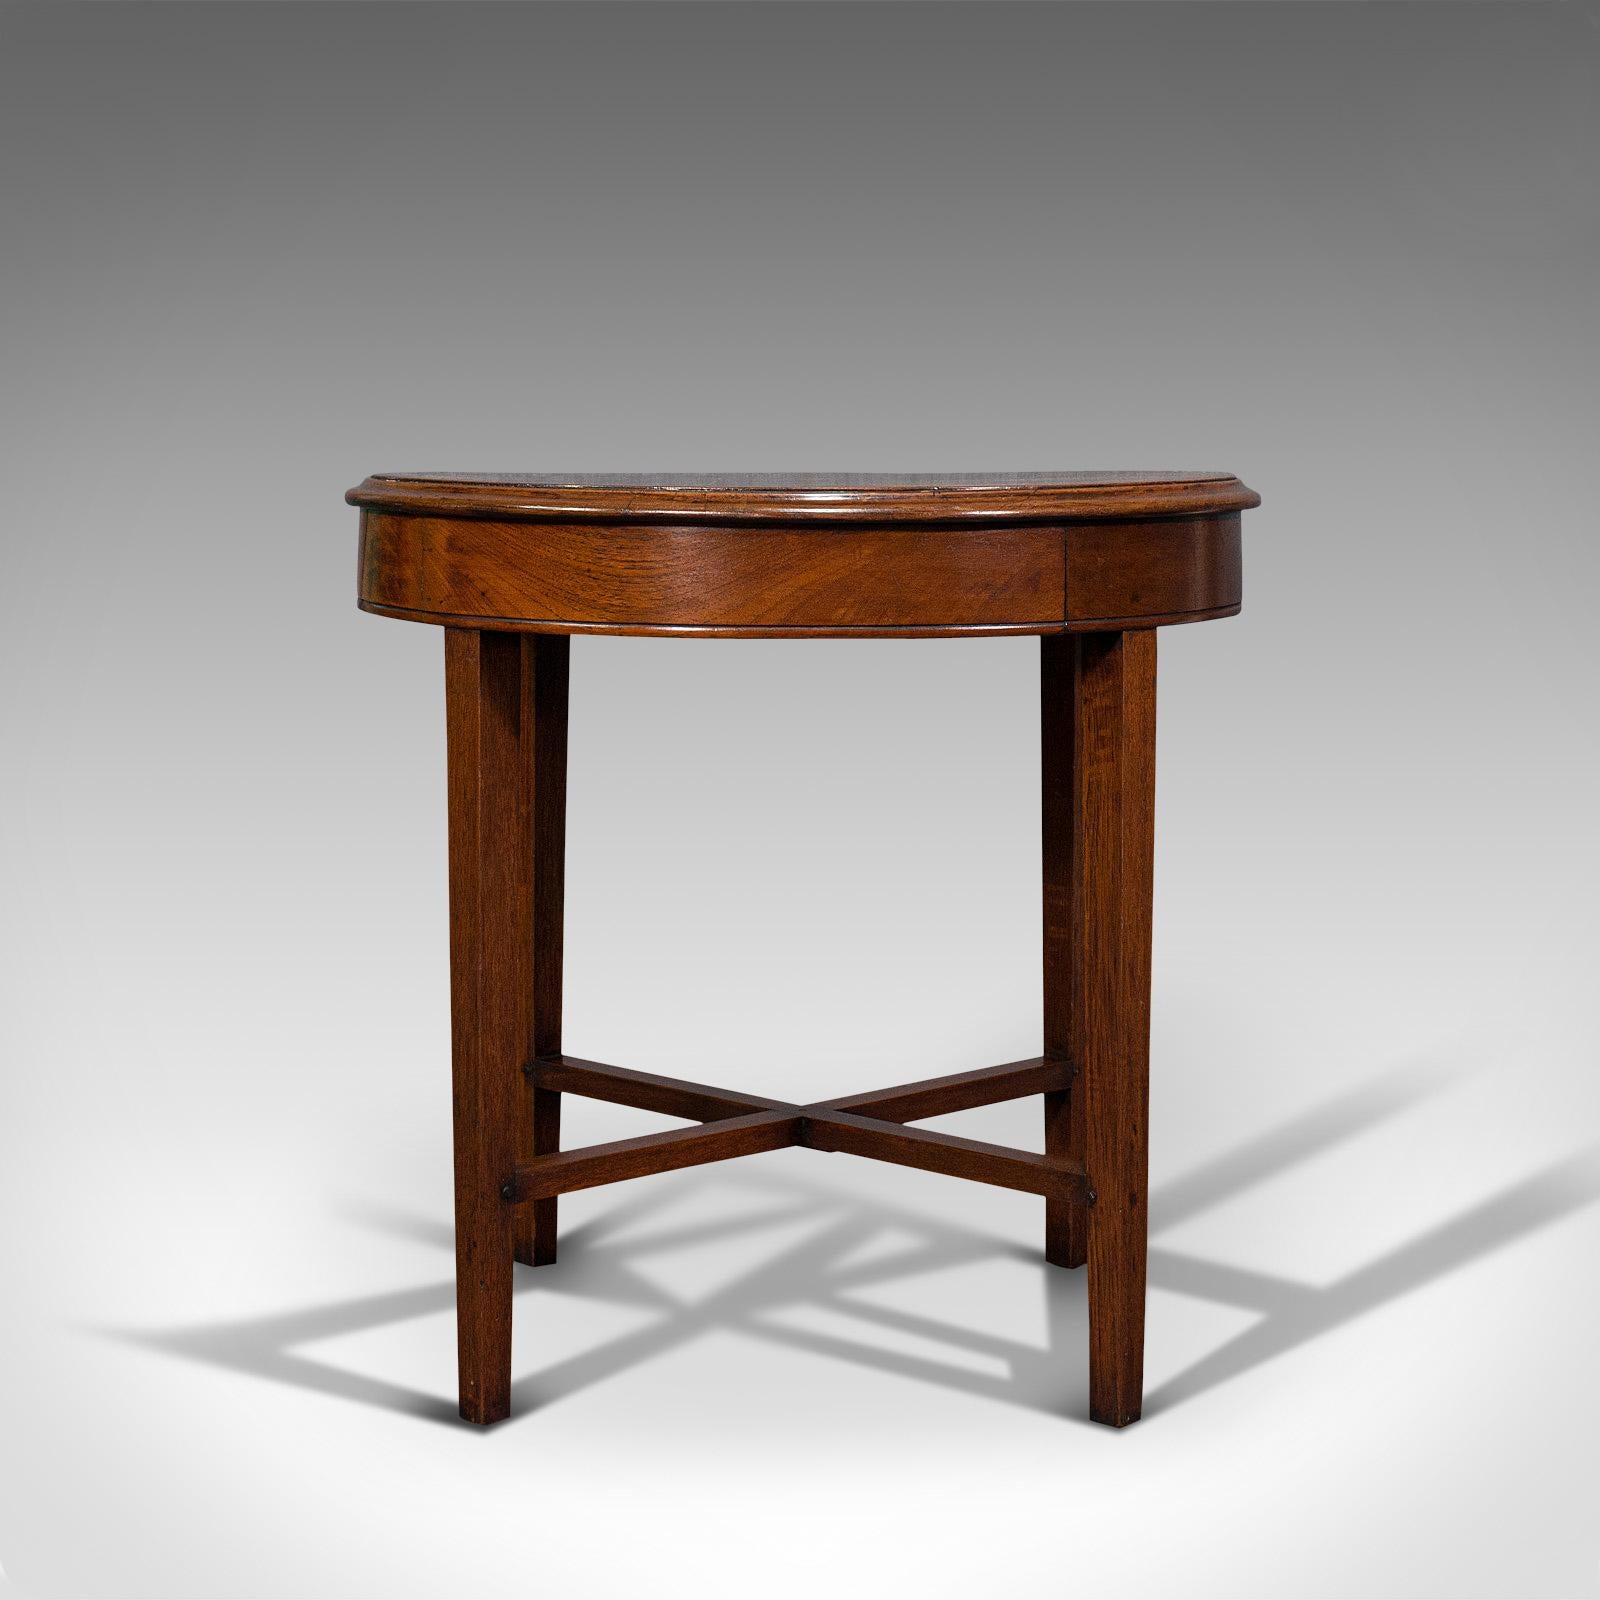 This is an antique circular coffee table. An English, oak lamp or side table, dating to the Victorian period, circa 1880.

Appealing drum-shape profile
Displaying a desirable aged patina
Select oak shows fine grain interest
Rich caramel hues